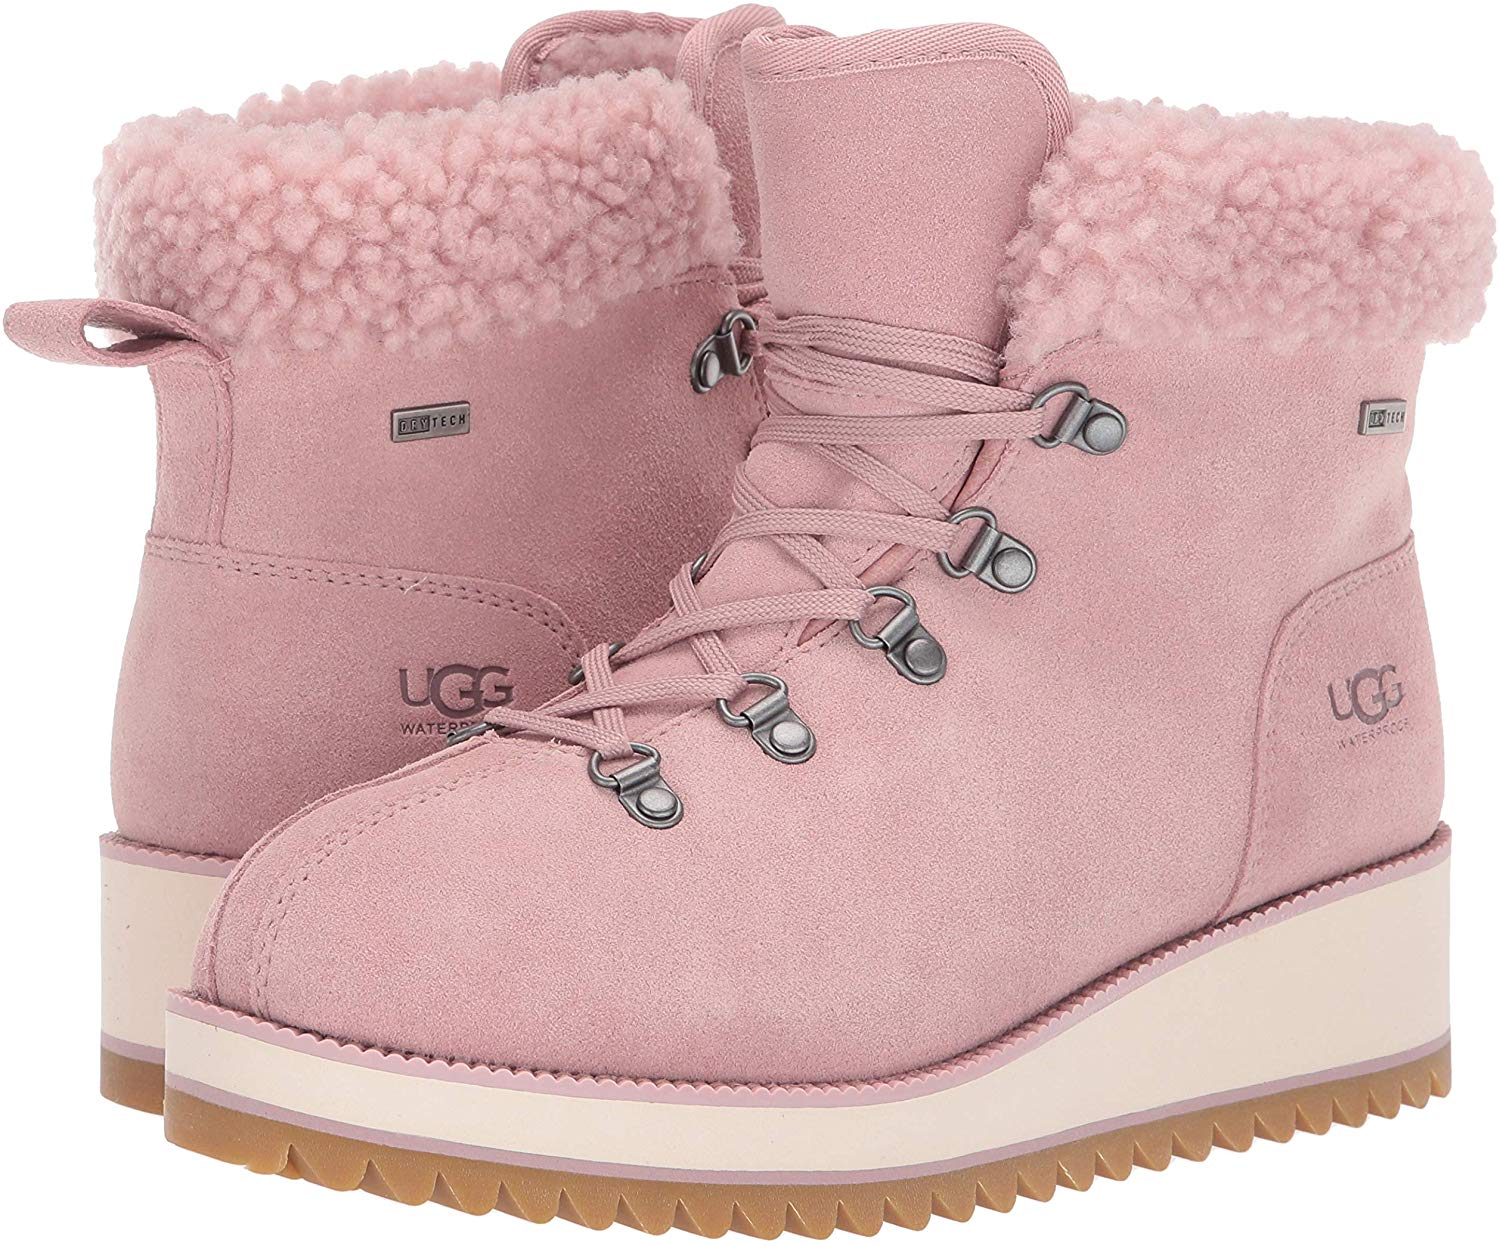 UGG Women's Birch Lace-up Shearling Snow Boot, Pink Crystal, Size 8.0